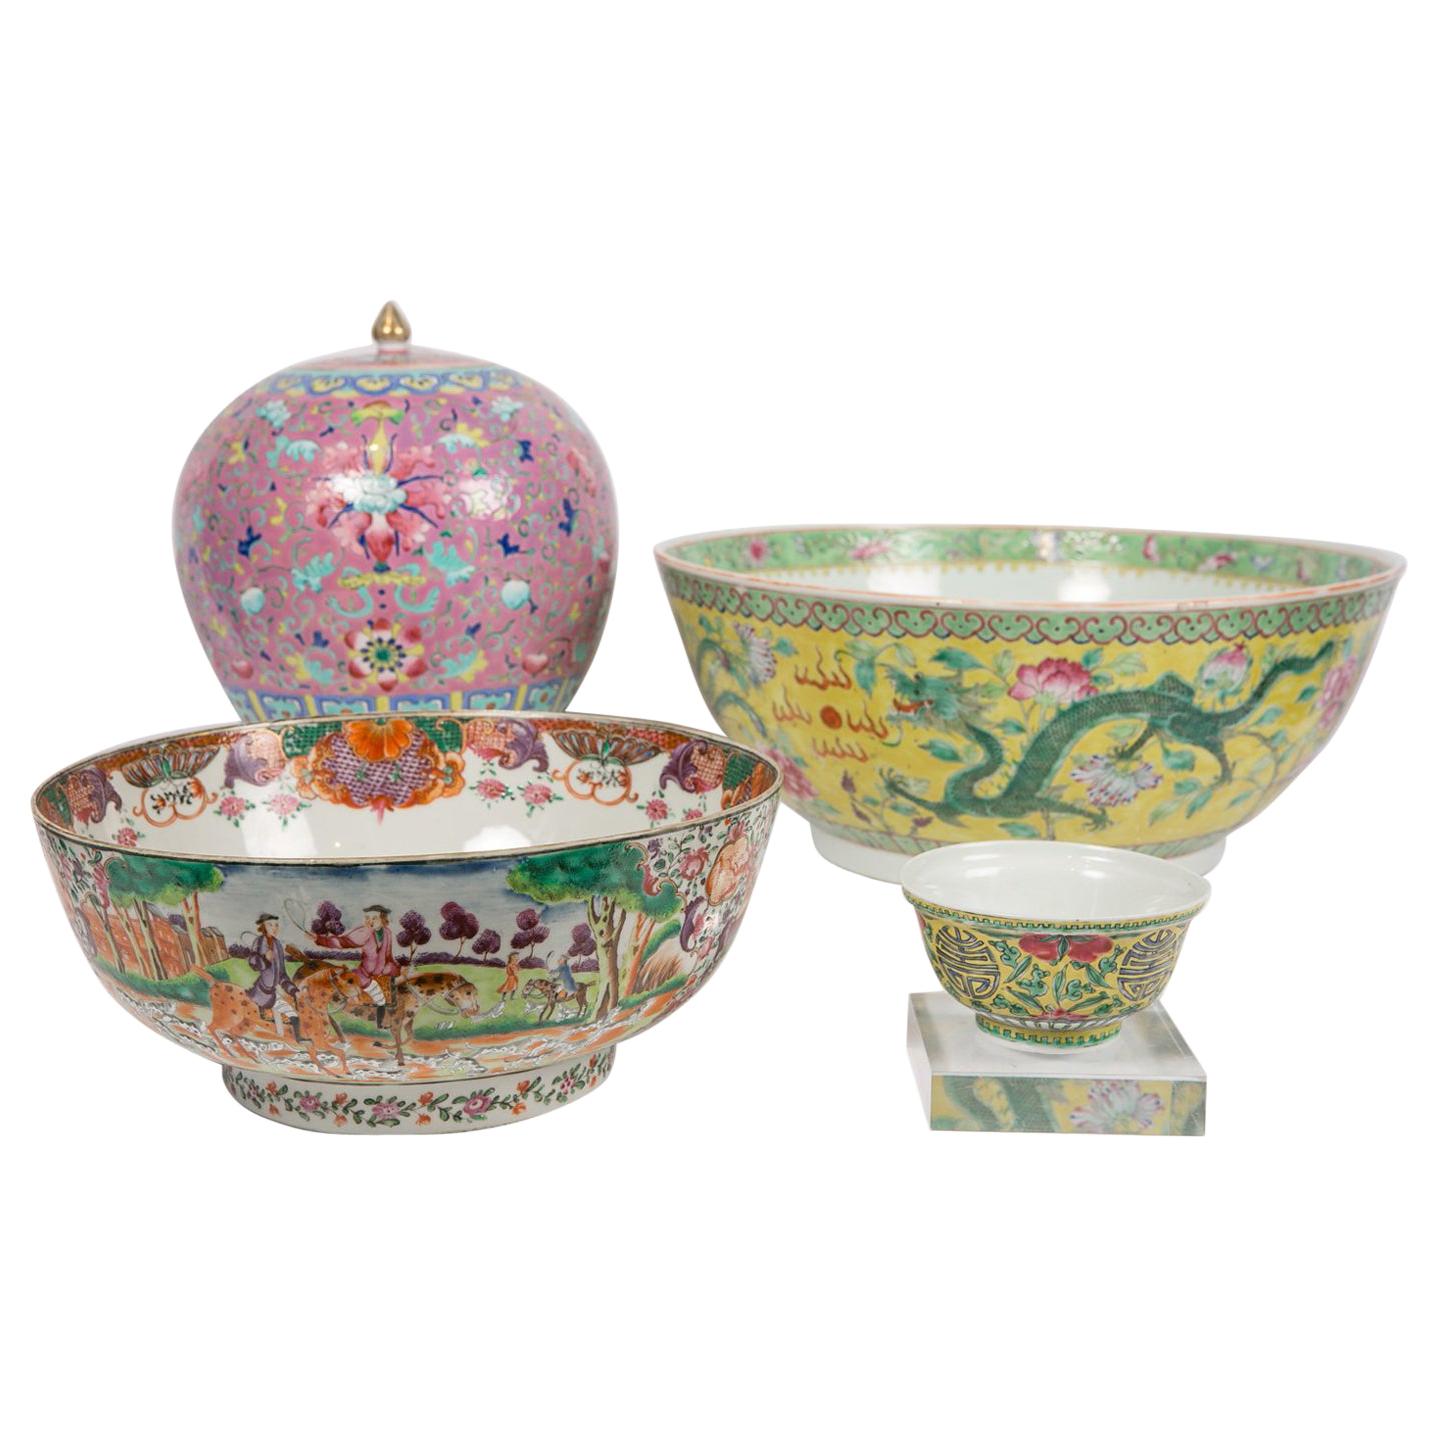 Collection of Antique Chinese Famille Rose Porcelain Jar and Bowls